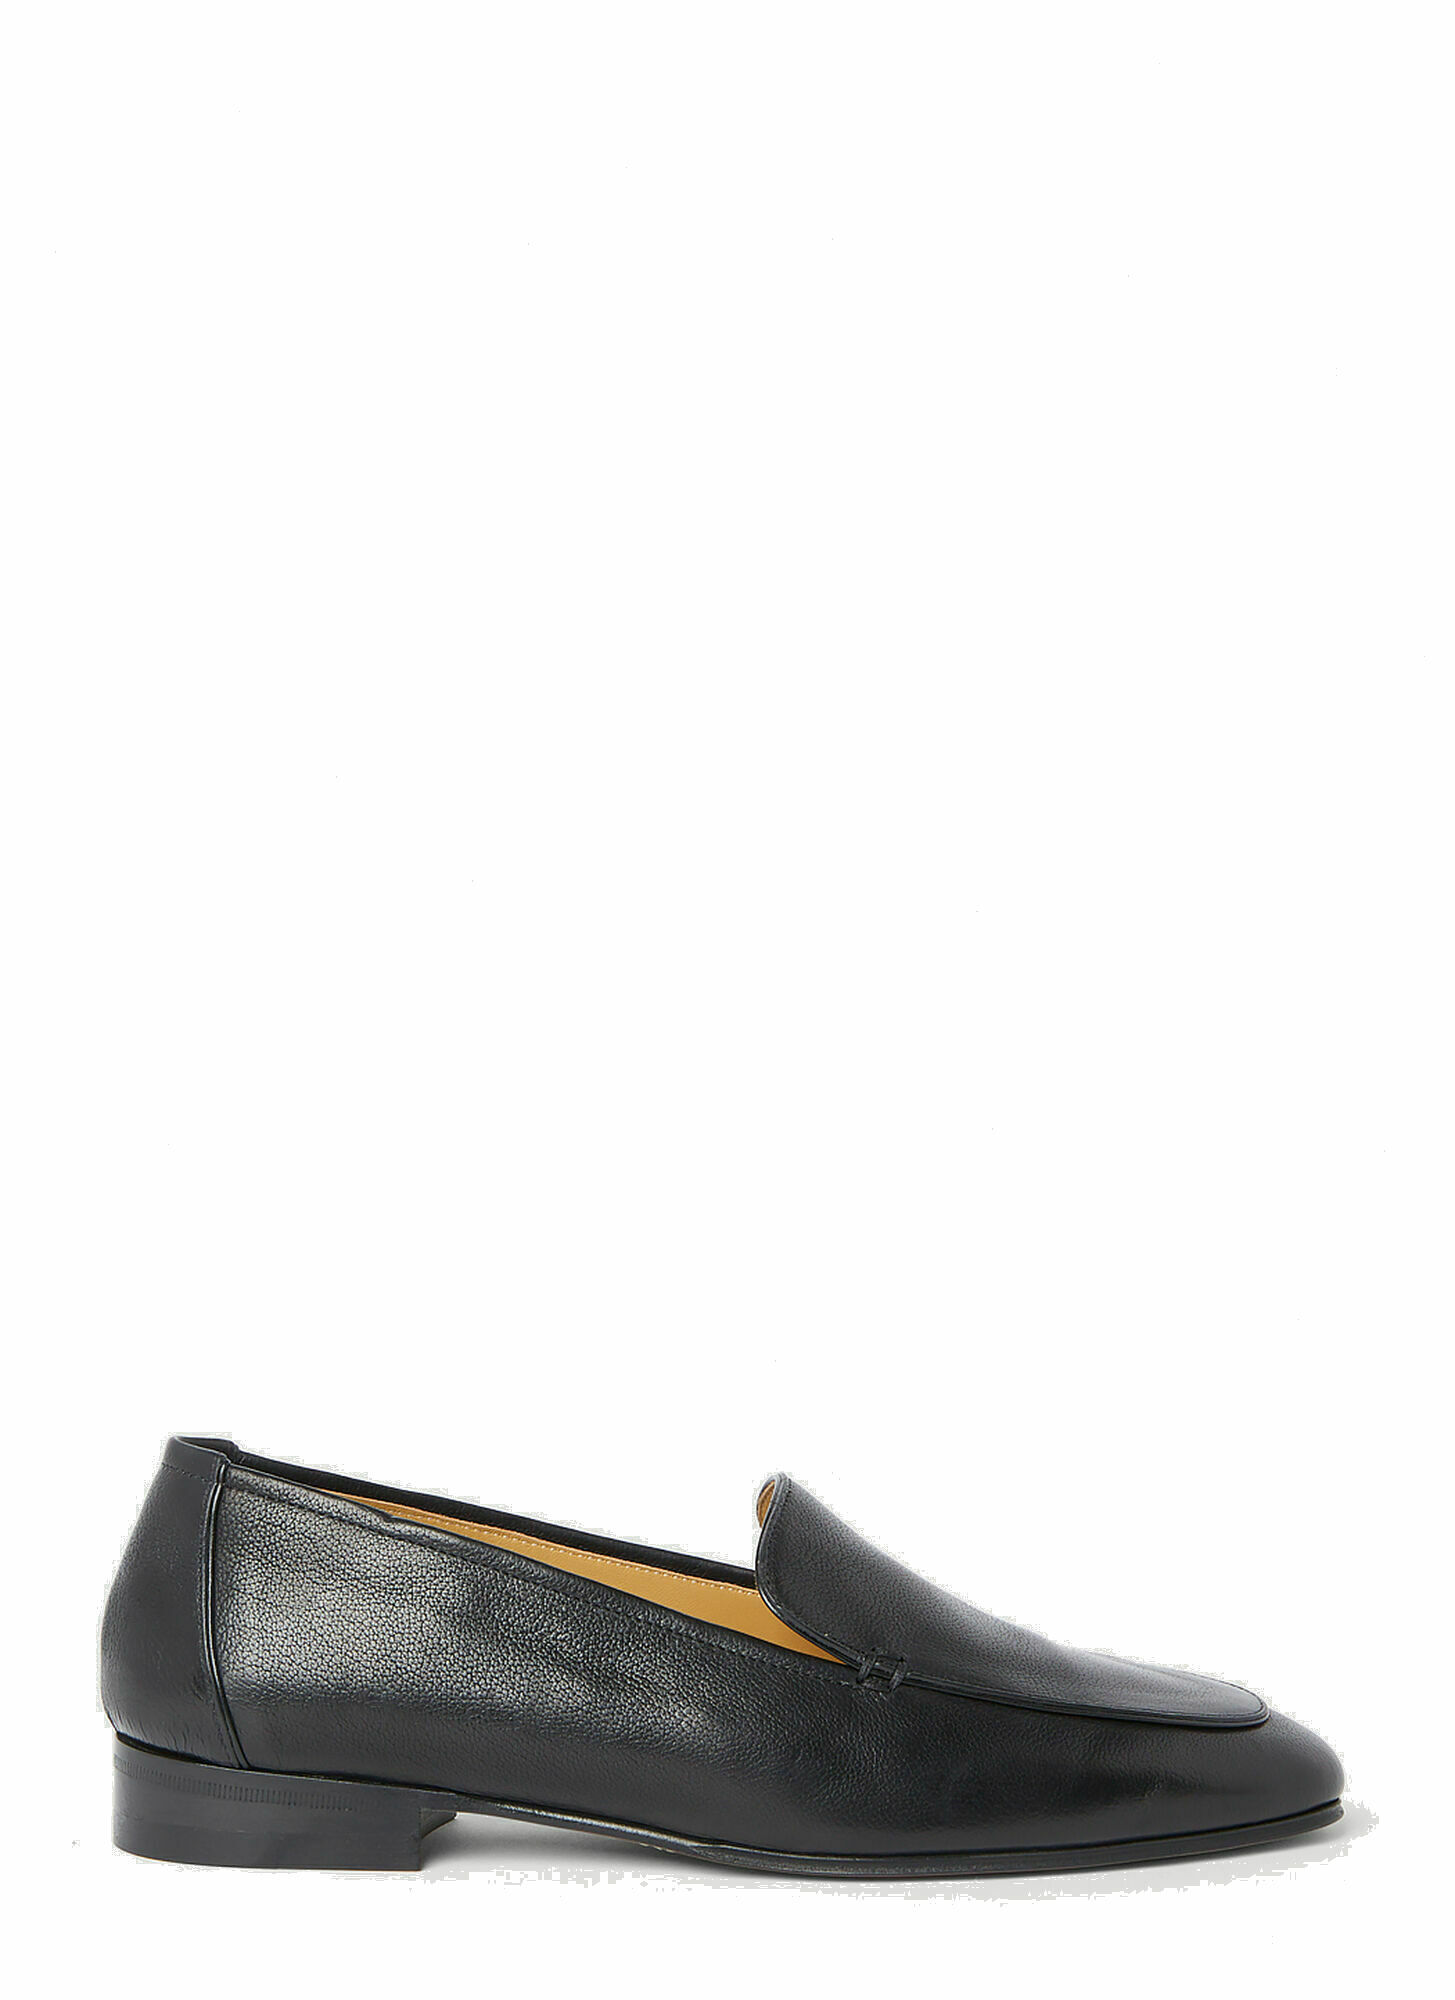 The Row - Adam Loafers in Black The Row